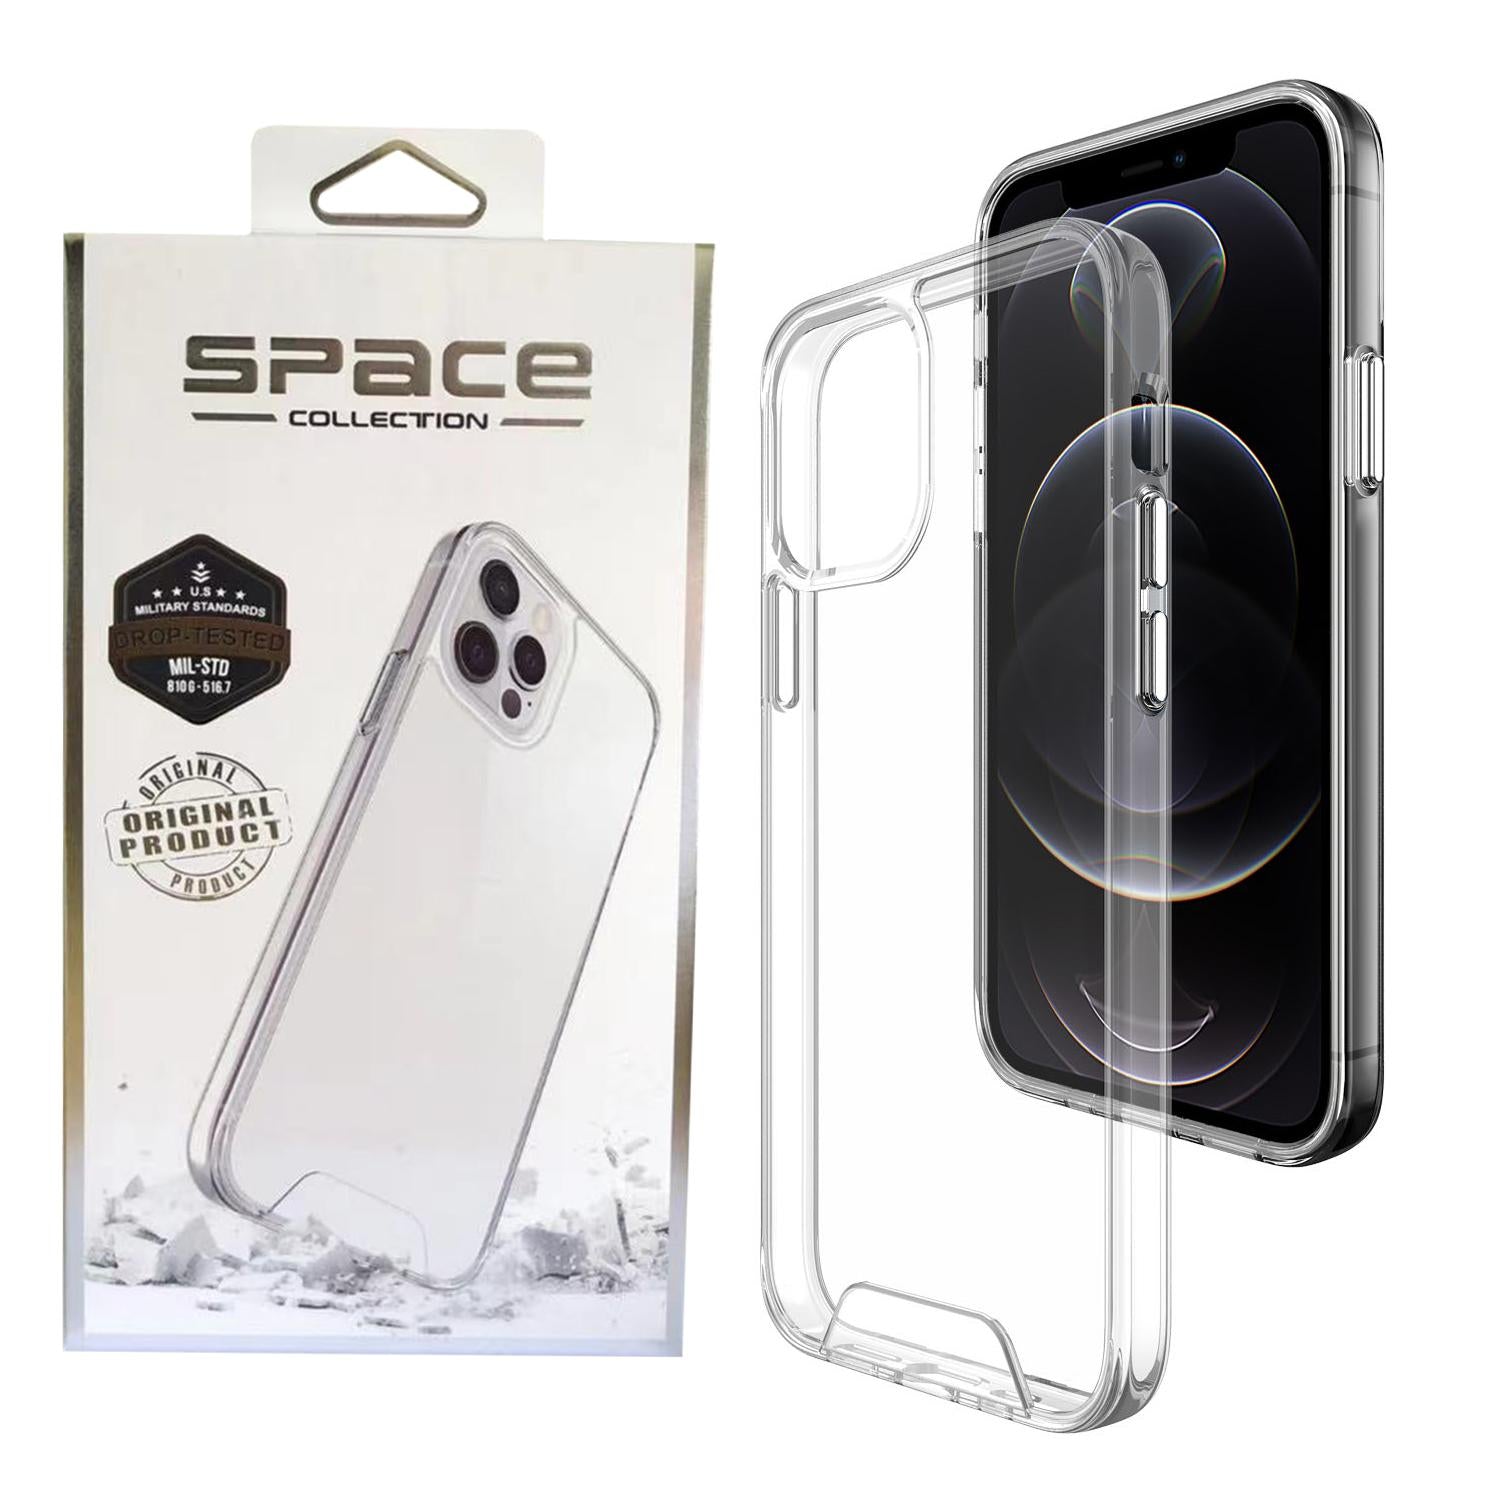 Case Space Collection 11 pro max